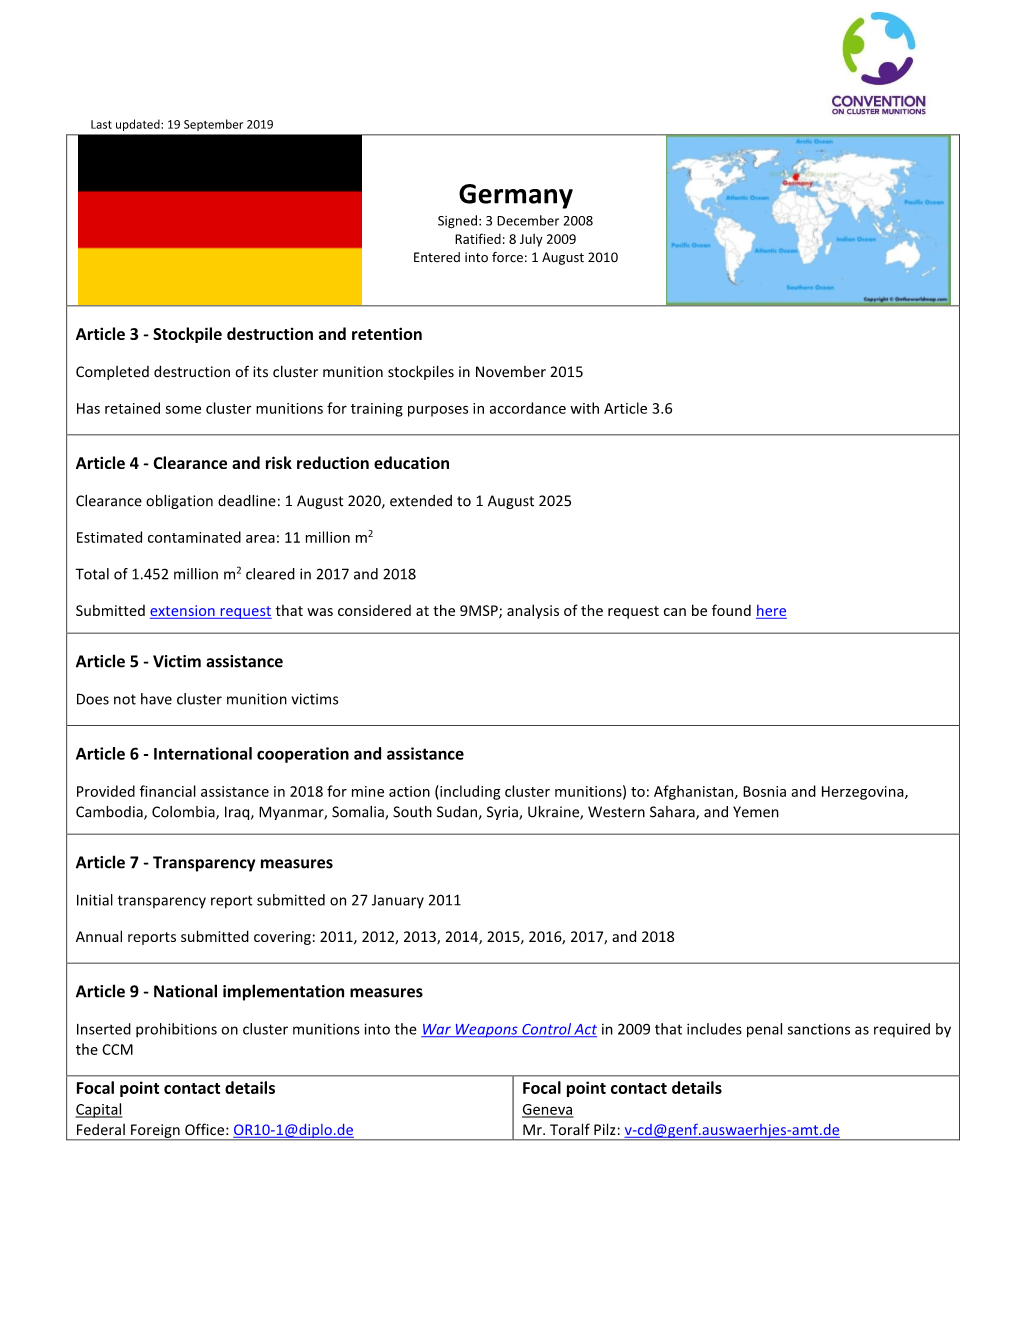 Germany Signed: 3 December 2008 Ratified: 8 July 2009 Entered Into Force: 1 August 2010